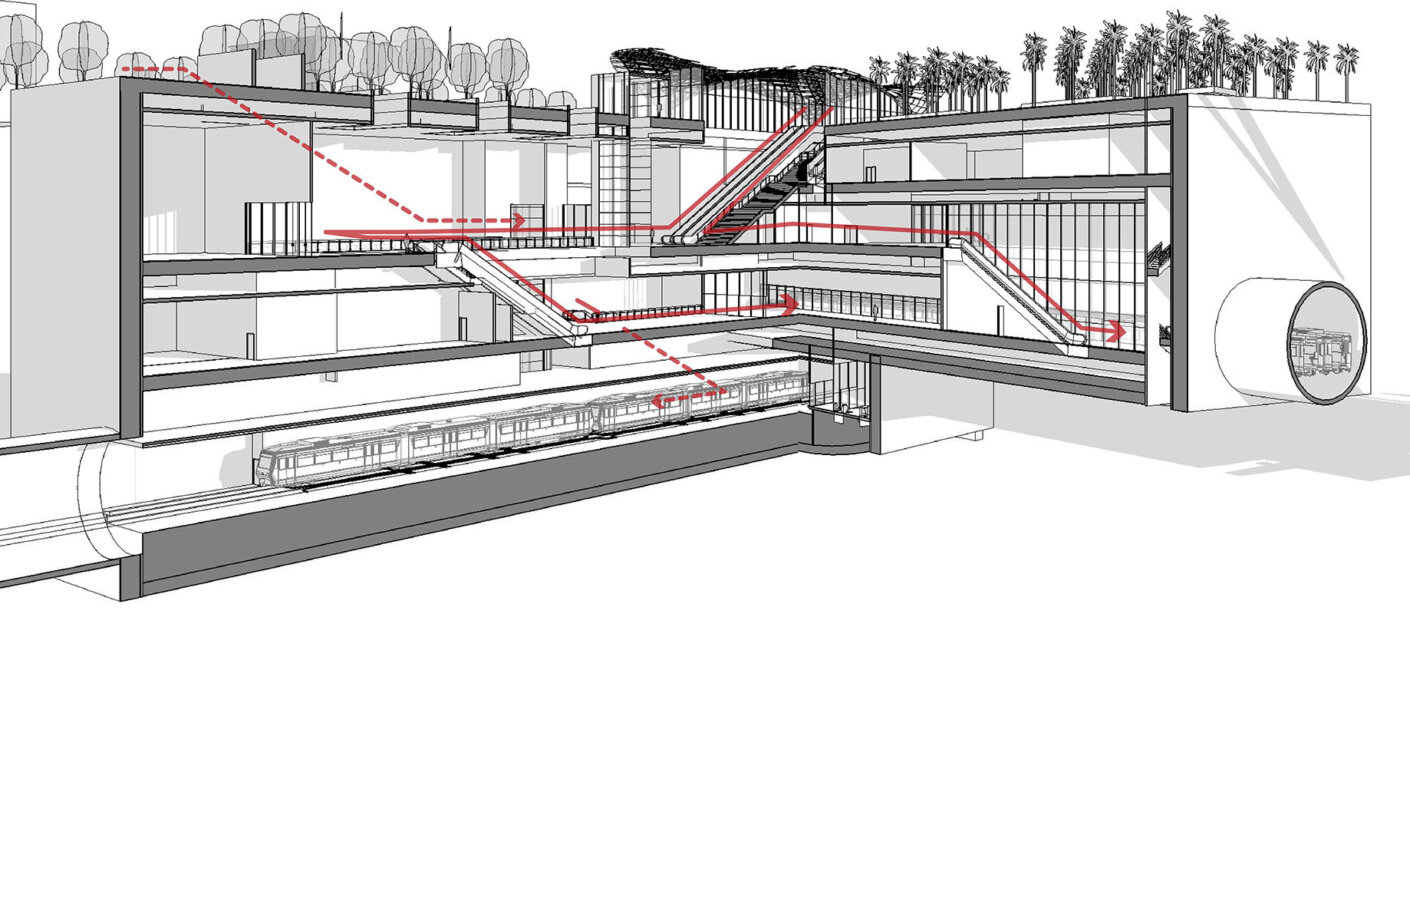 Perspective section of Rideau station showing circulation.